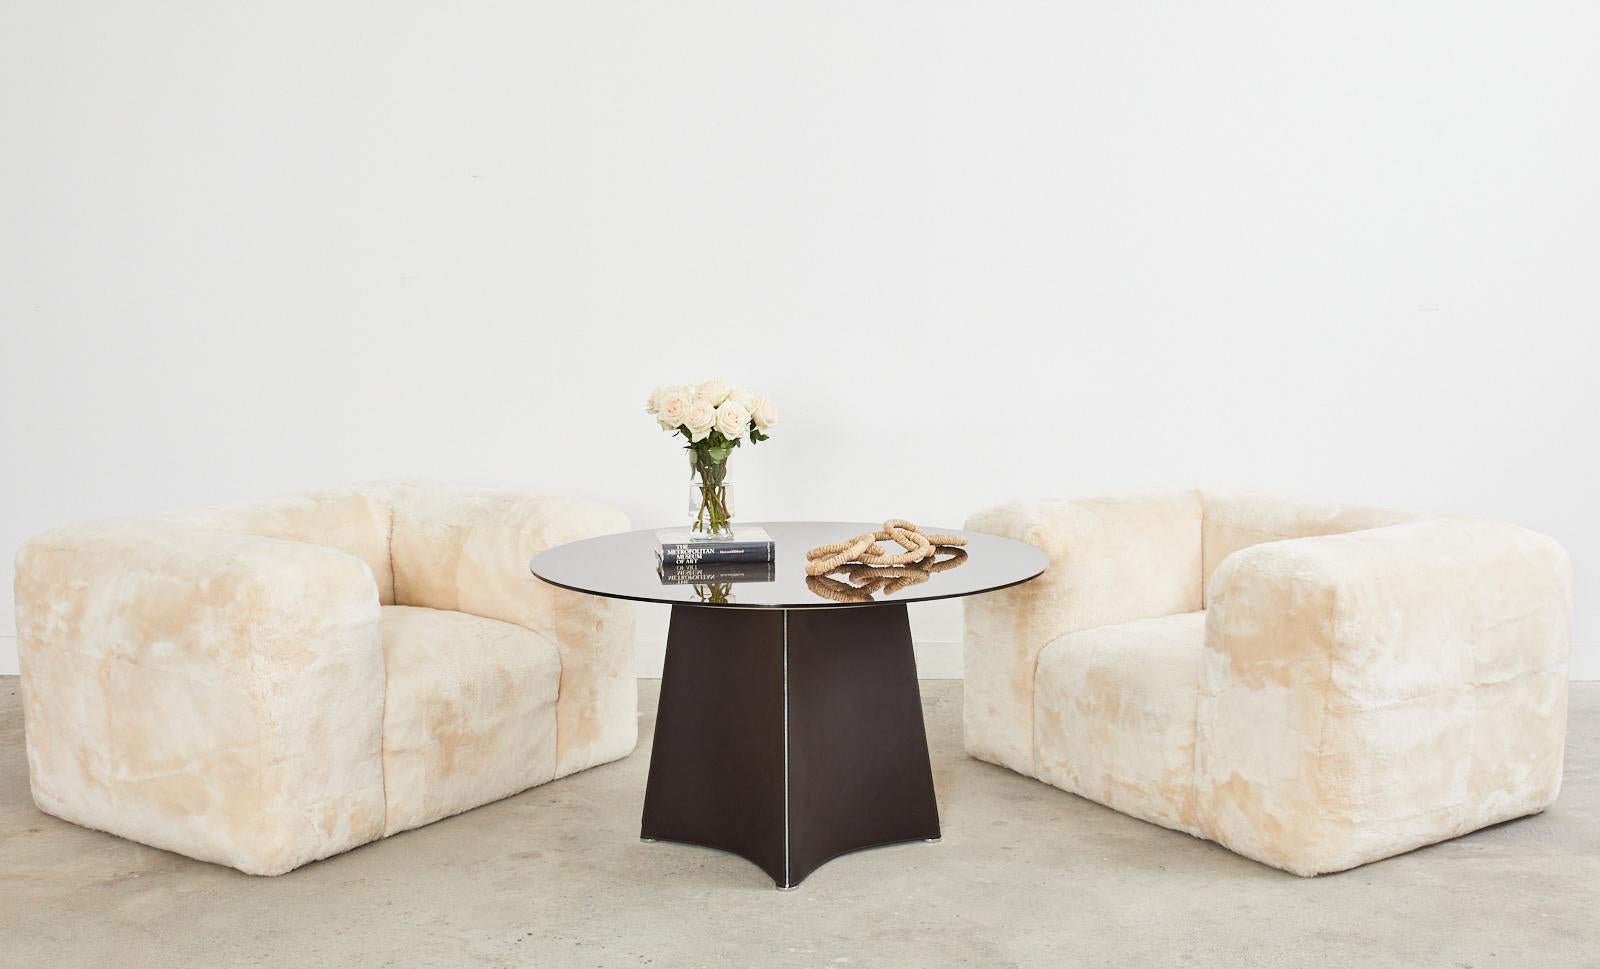 Chic Italian leather and glass round dining table or center table designed by Rodolfo Dordoni for Matteo Grassi. The pedestal style table features a winged base clad in leather with zippers on the border that fit like a fine Italian suit. The base